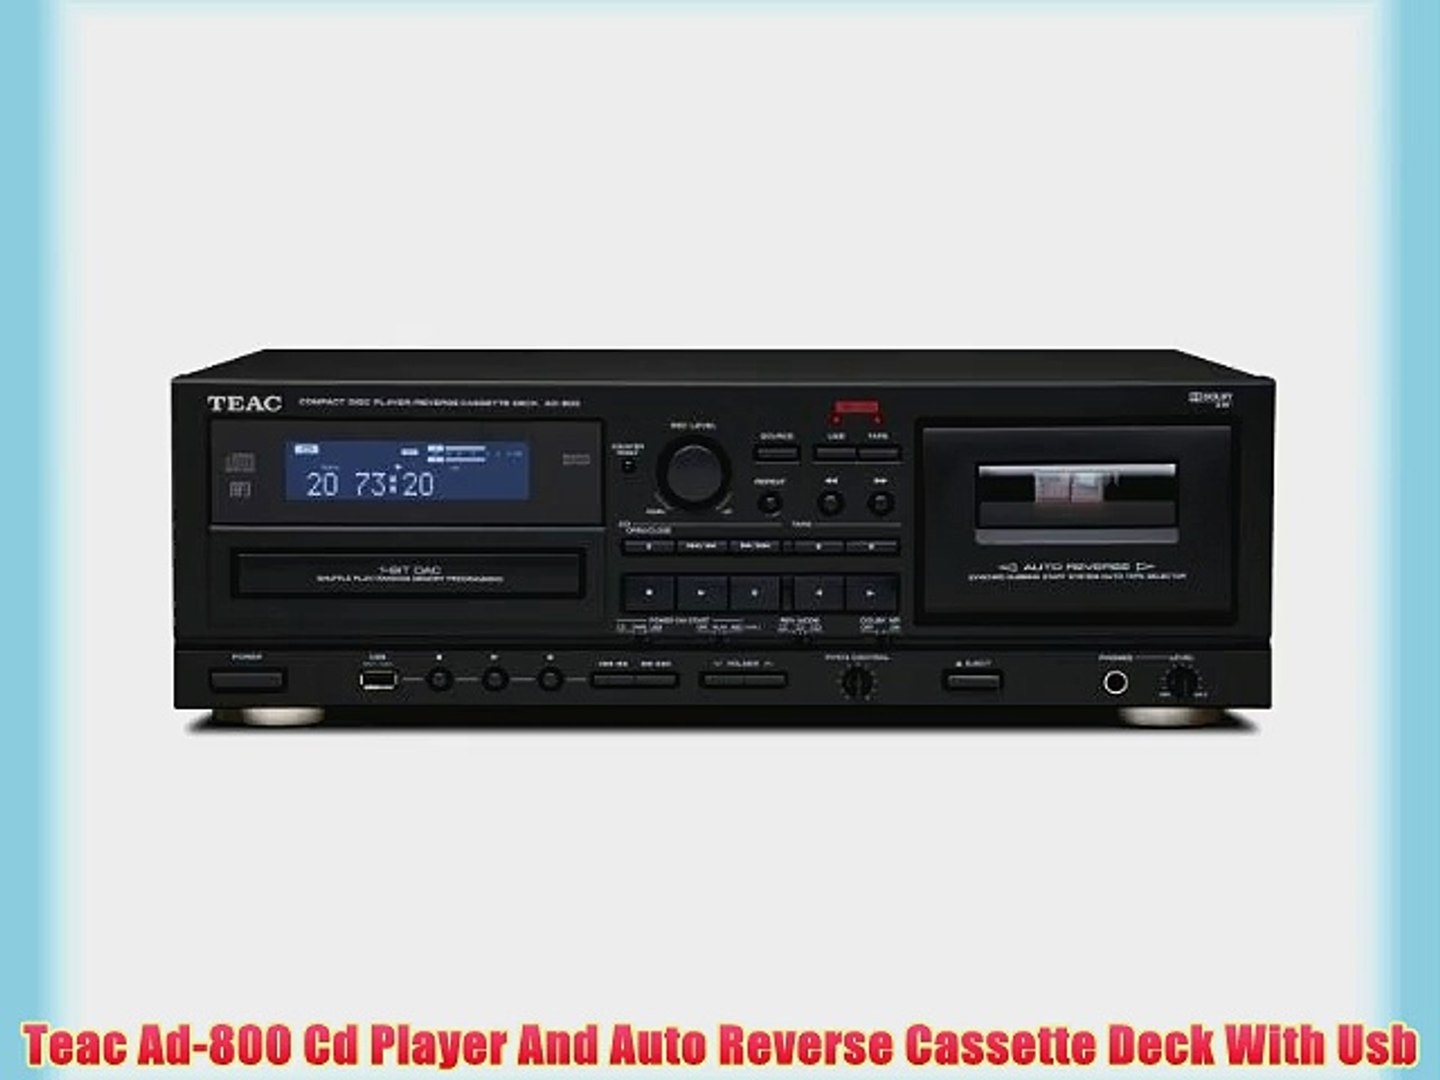 Teac Ad-800 Cd Player And Auto Reverse Cassette Deck With Usb - video  Dailymotion